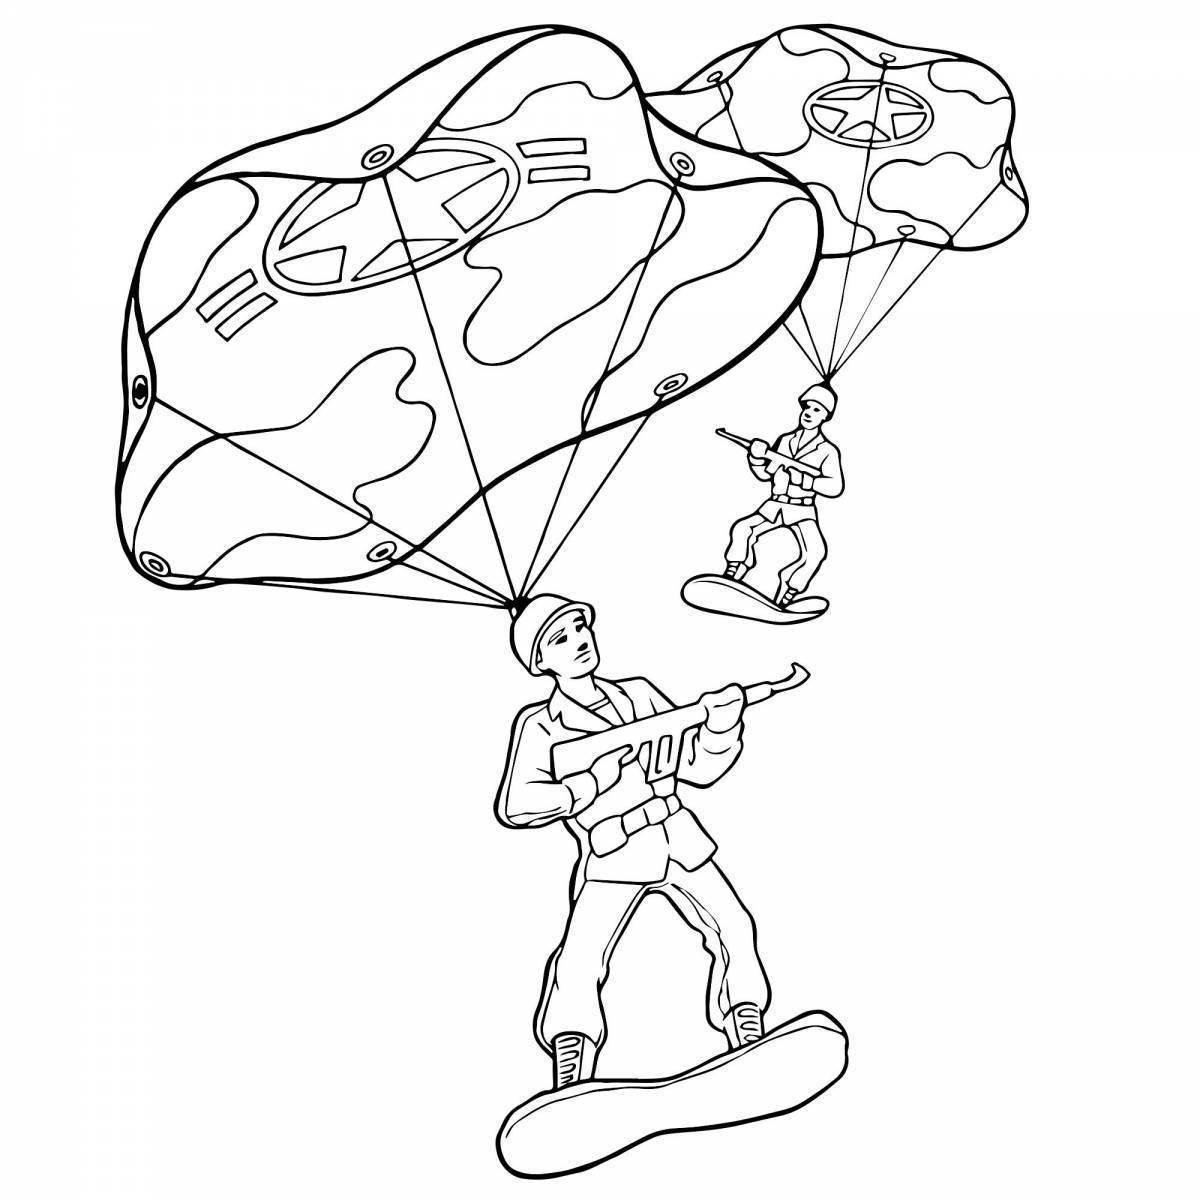 Fast skydiver coloring page